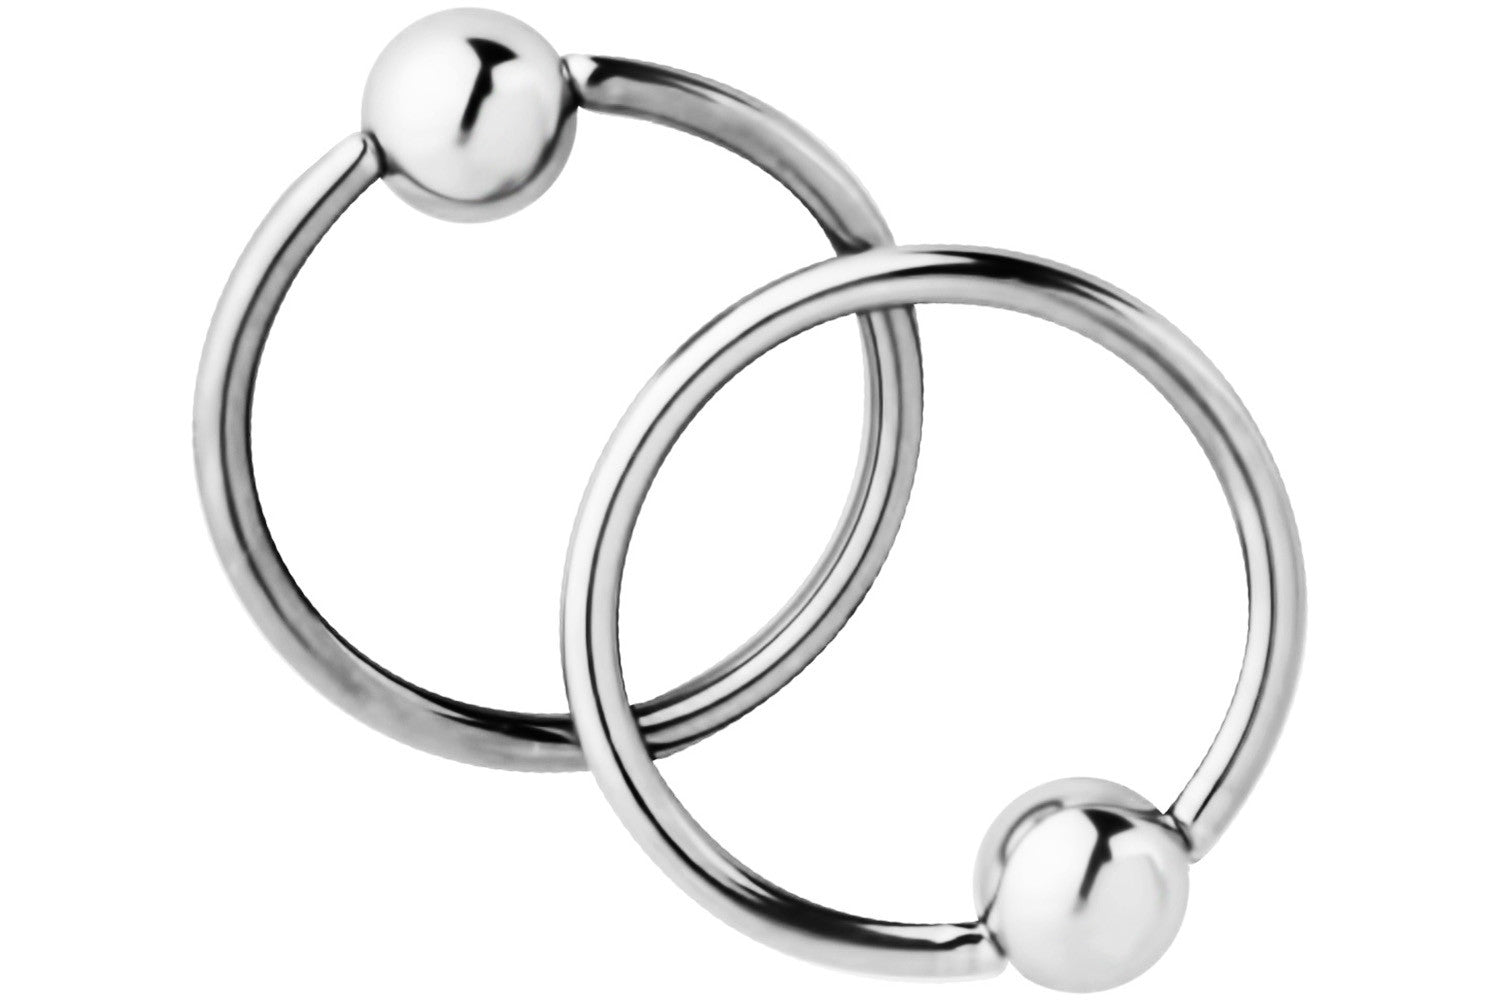 These 16 gauge rings are hypoallergenic and nickel free. They can be worn in a variety of 16 gauge body piercings.